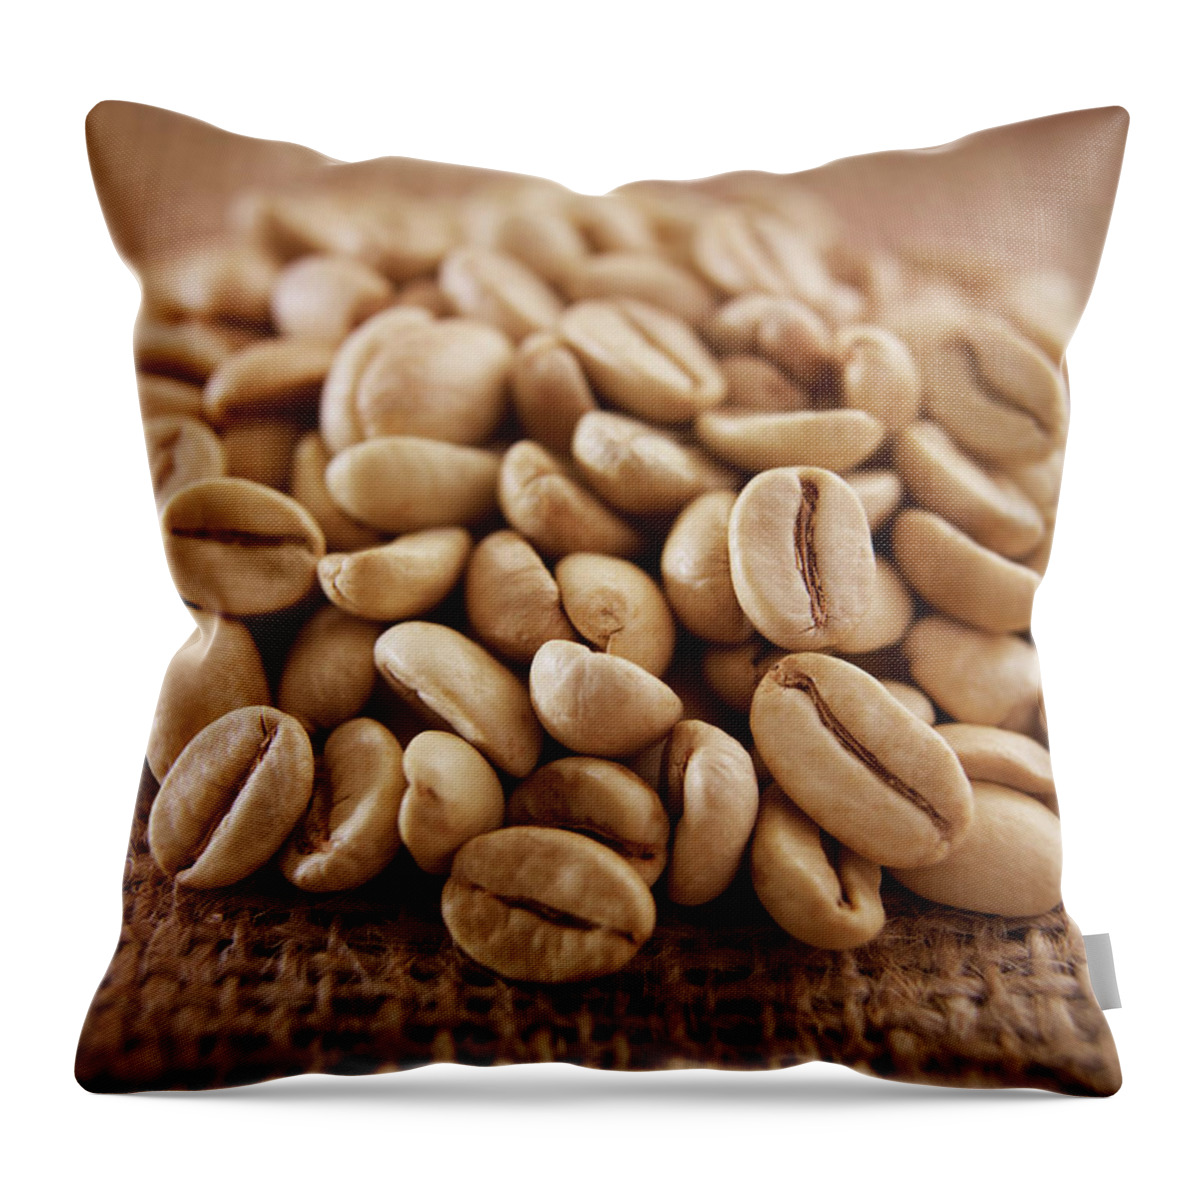 Heap Throw Pillow featuring the photograph Close Up Of Raw Coffee Beans by Adam Gault